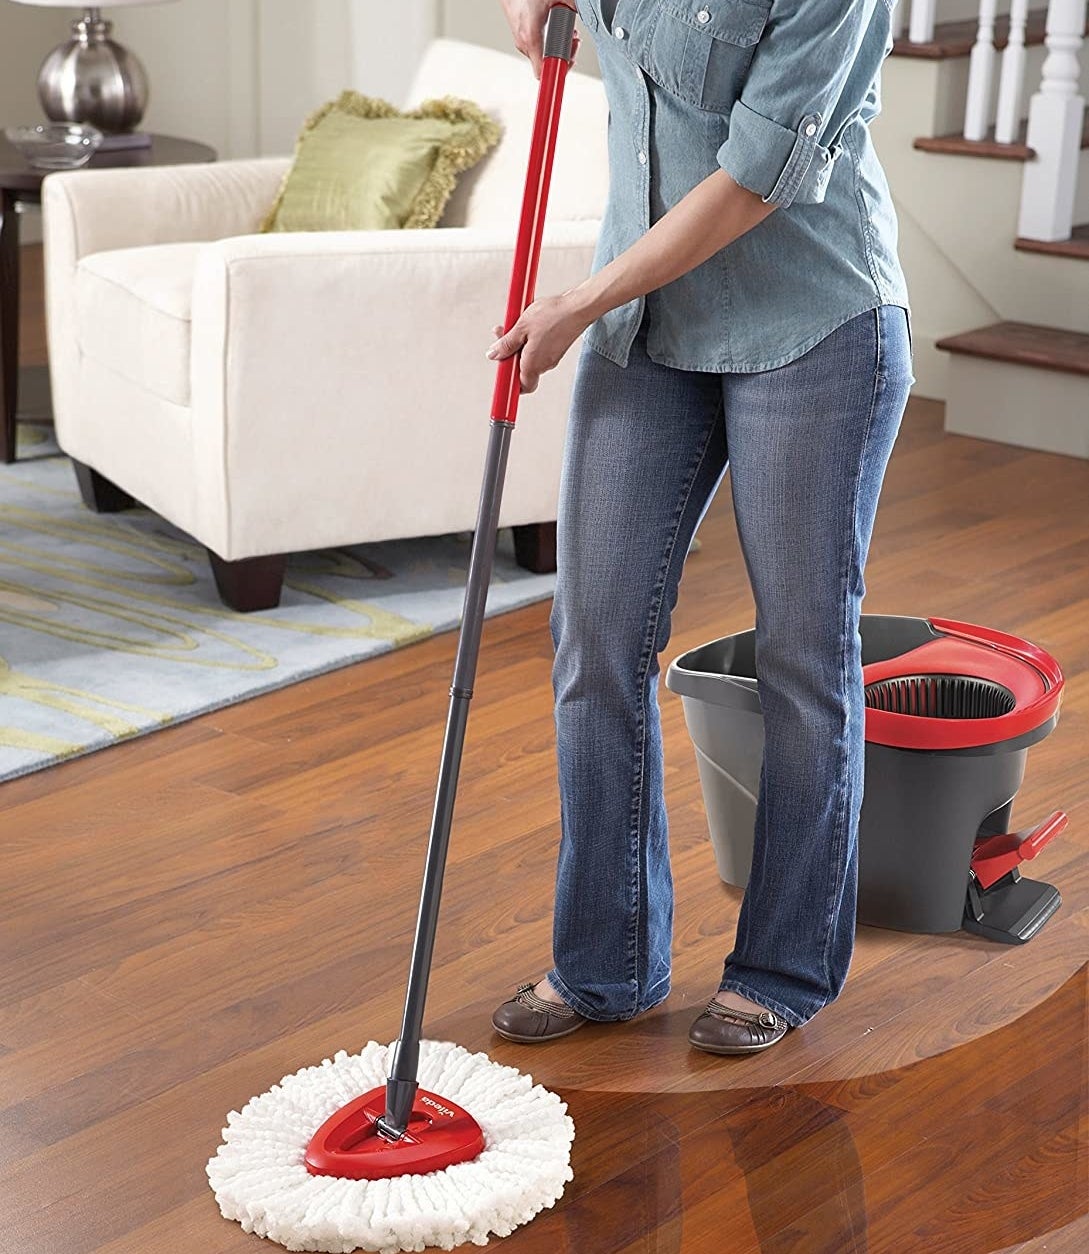 A person using the mop on their hardwood floors